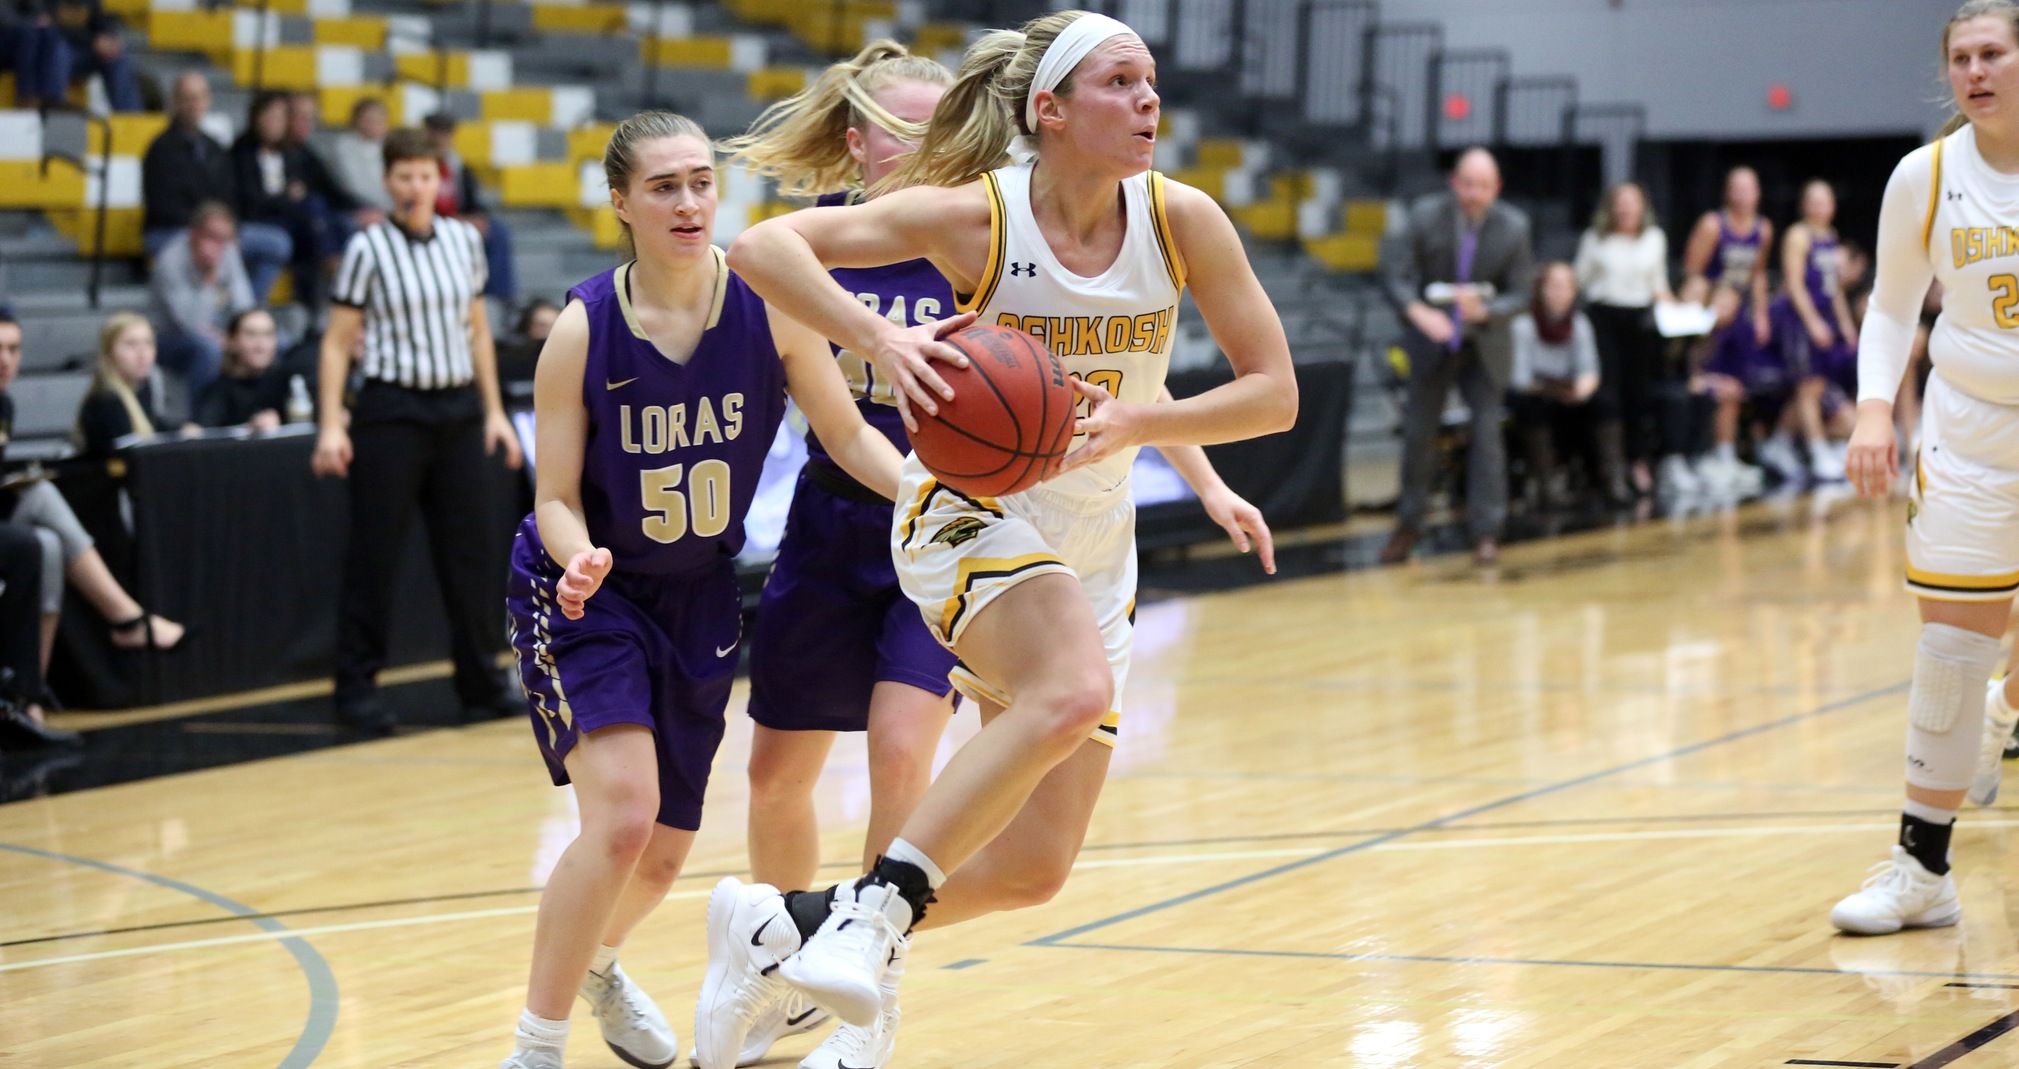 Melanie Schneider tallied 12 points, nine rebounds and five assists against the Duhawks.